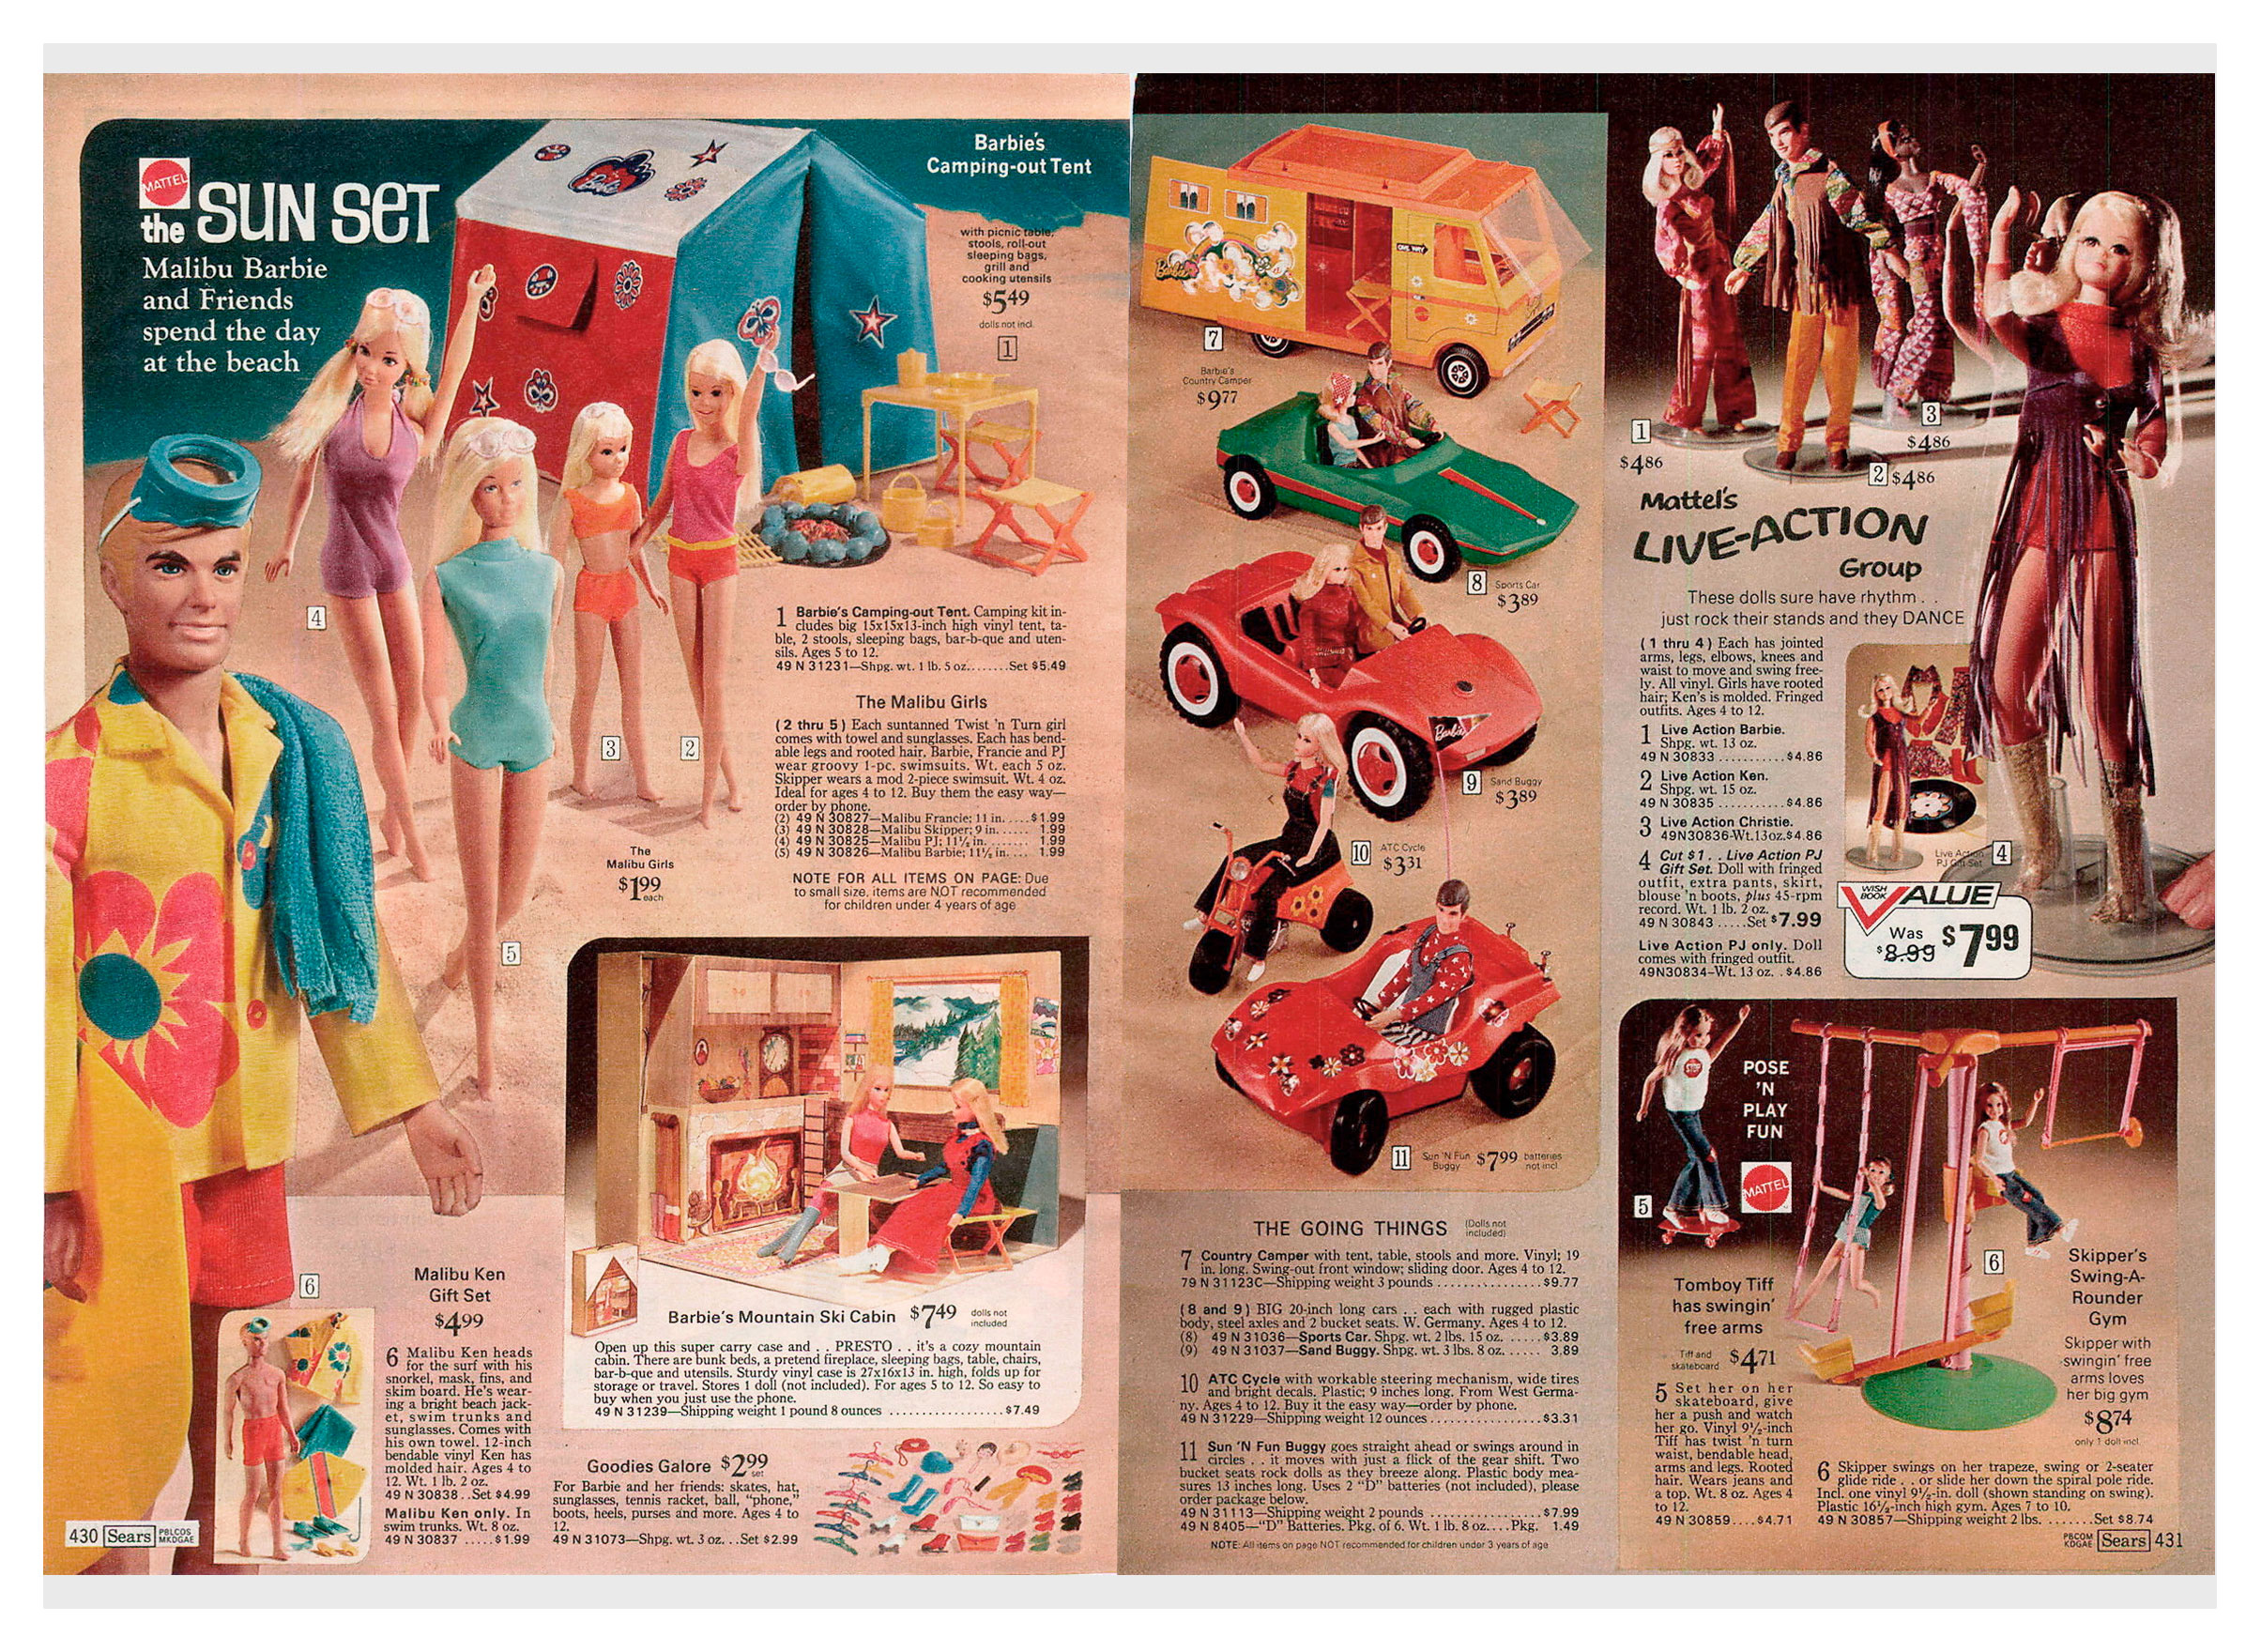 sears christmas catalog 1972 - Cansingout Tent the Sun Set Malibu Barbie and Friends spend the day at the beach Mattels LiveAction Group Alue B. $799 Teging Things